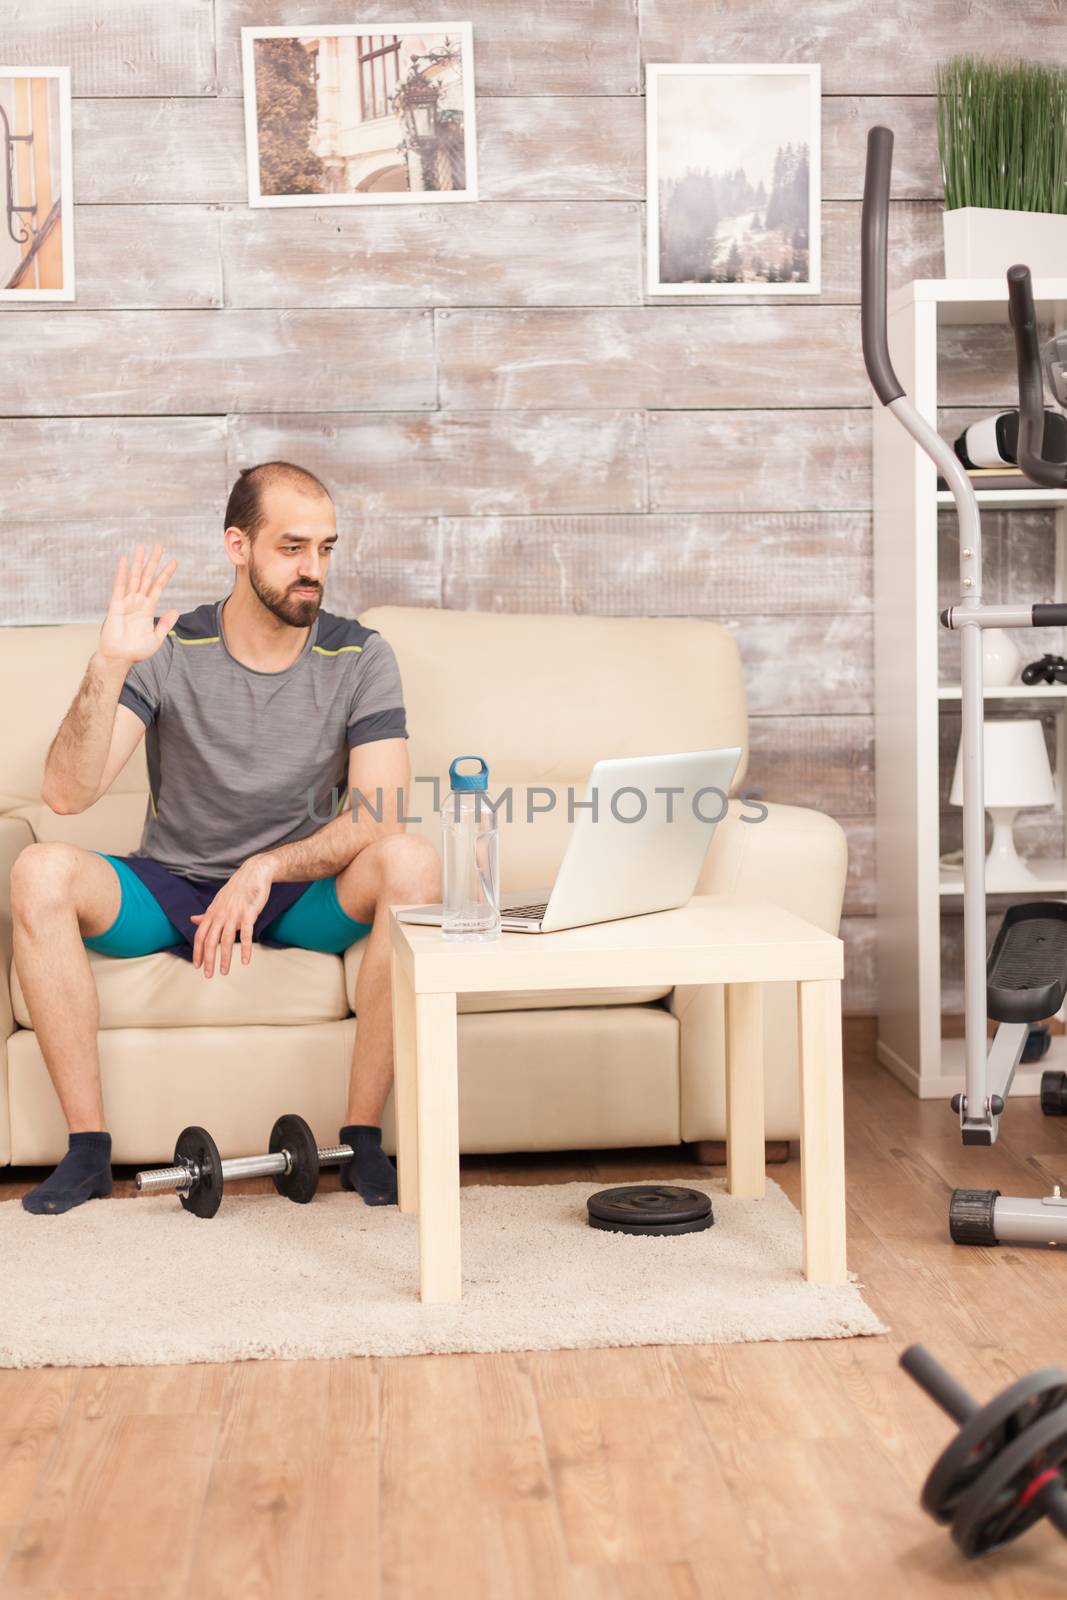 Athletic man waving at his personal trainer during online workout in time of global pandemic.